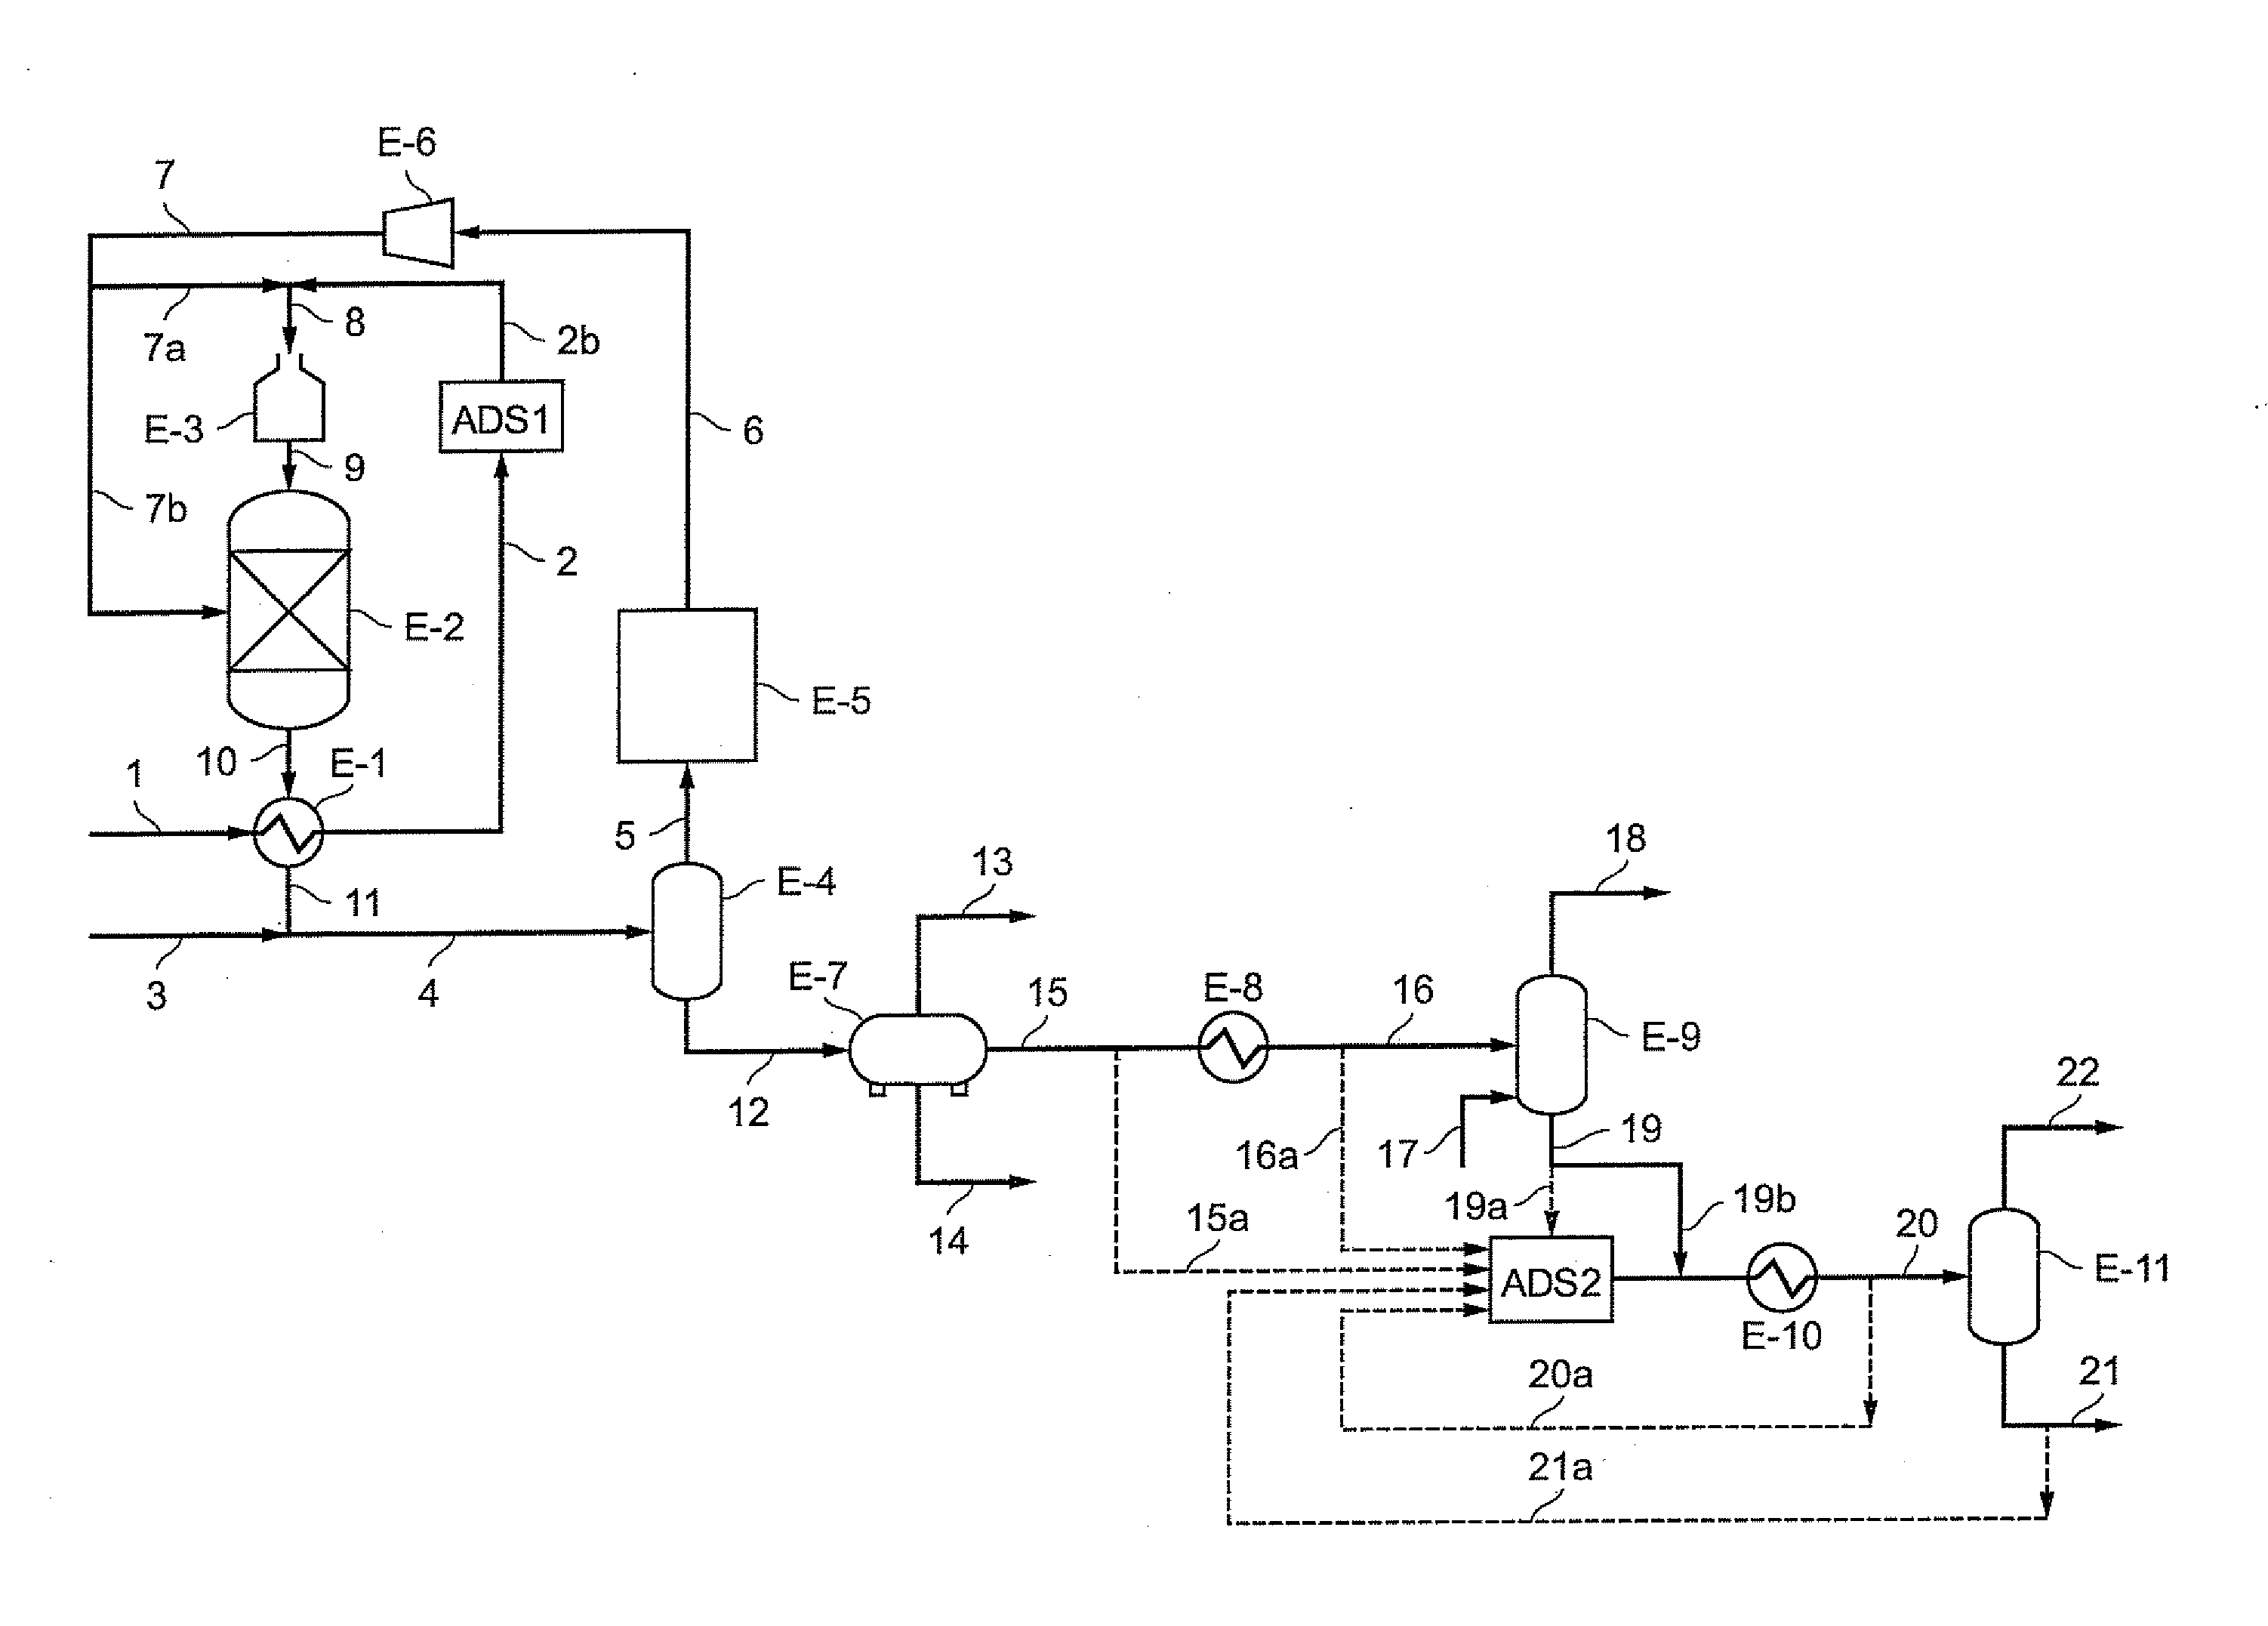 Process for Desulfurization and Denitration of a Gas-Oil-Type Hydrocarbon Fraction that Contains Nitrogen Compounds